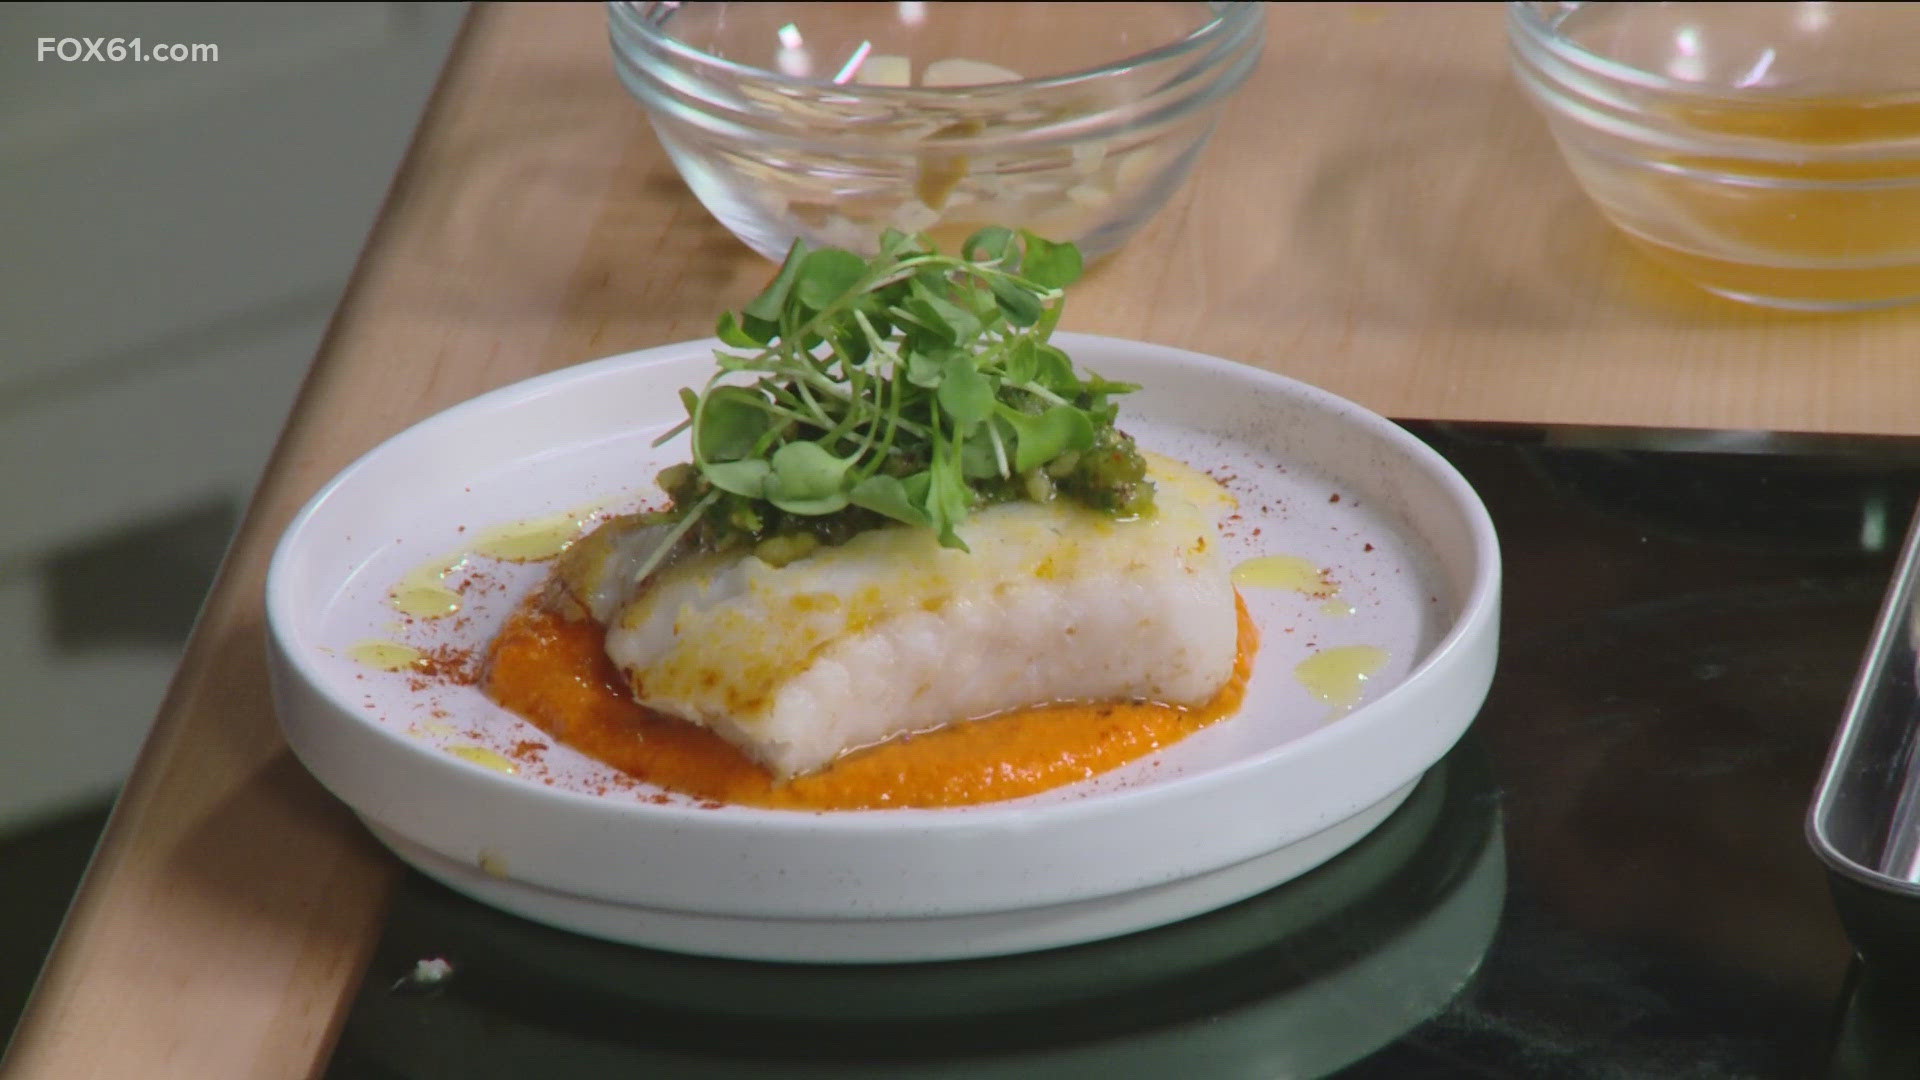 Here's how Chef Eric Bond from Griswold Wine Bar and Bistro makes Seared Cod with Romesco and Hazelnut-Basil Gremolata.